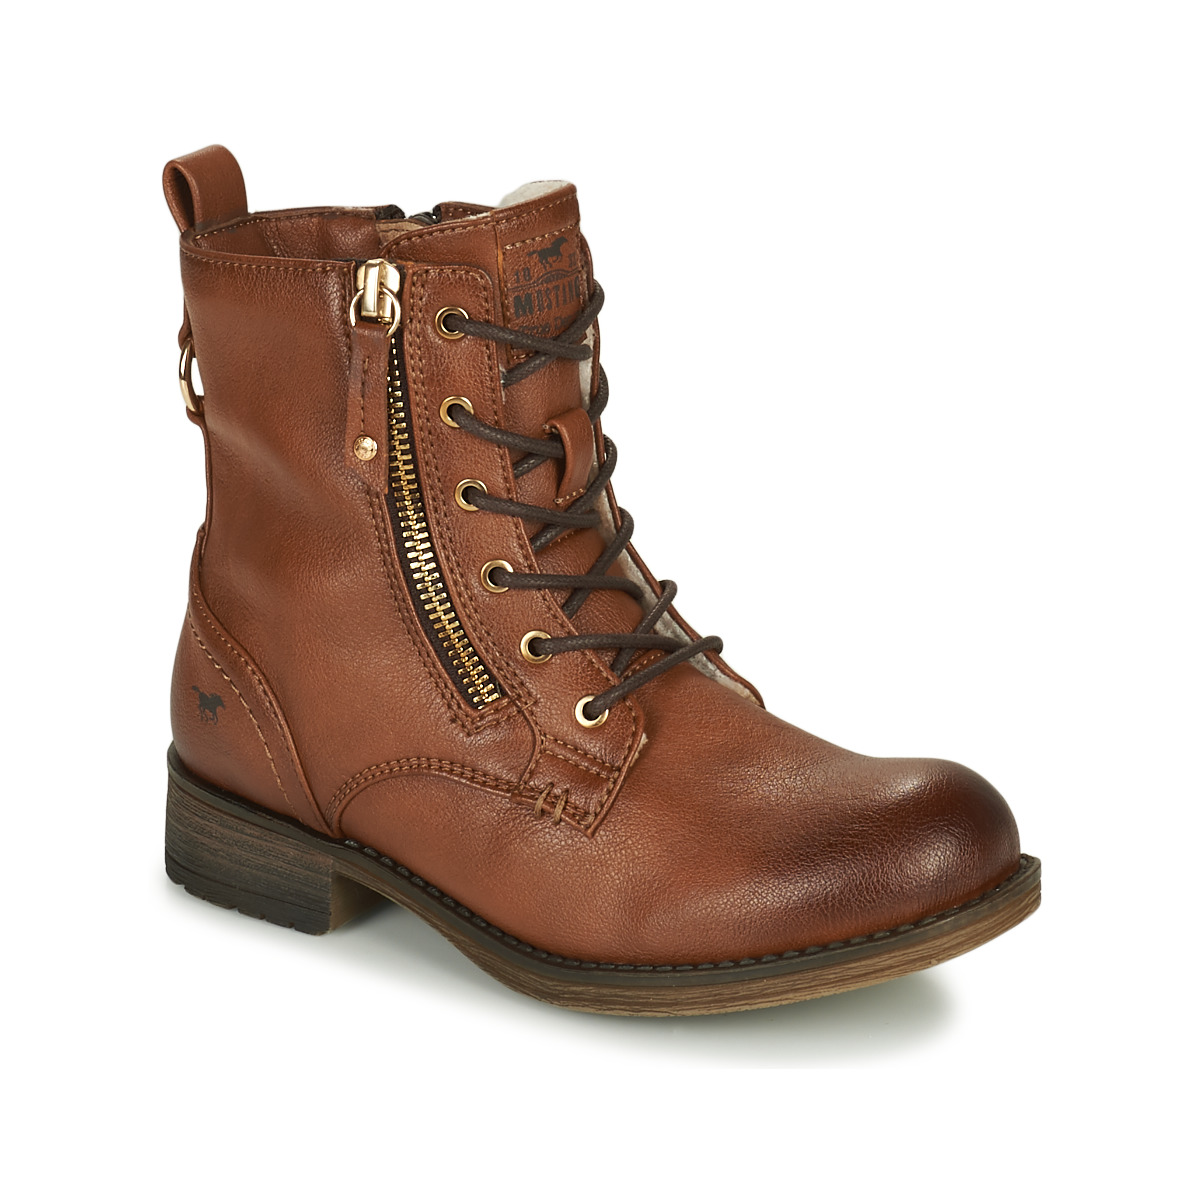 Chaussures Fille Boots Mustang 5026-623-308 Marron